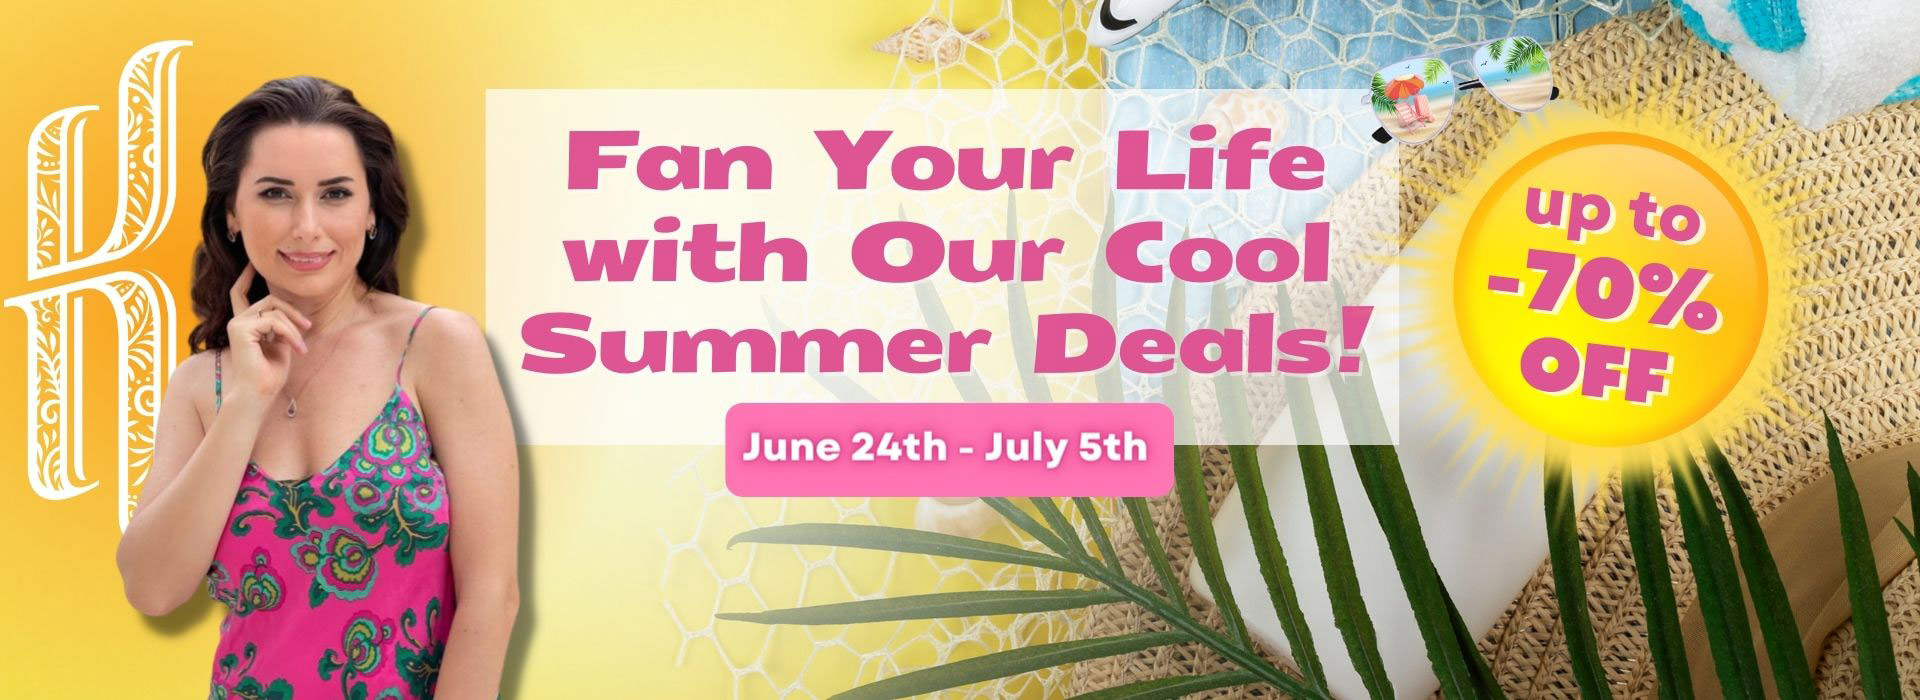 Fan Your Life with Our Cool Summer Deals!